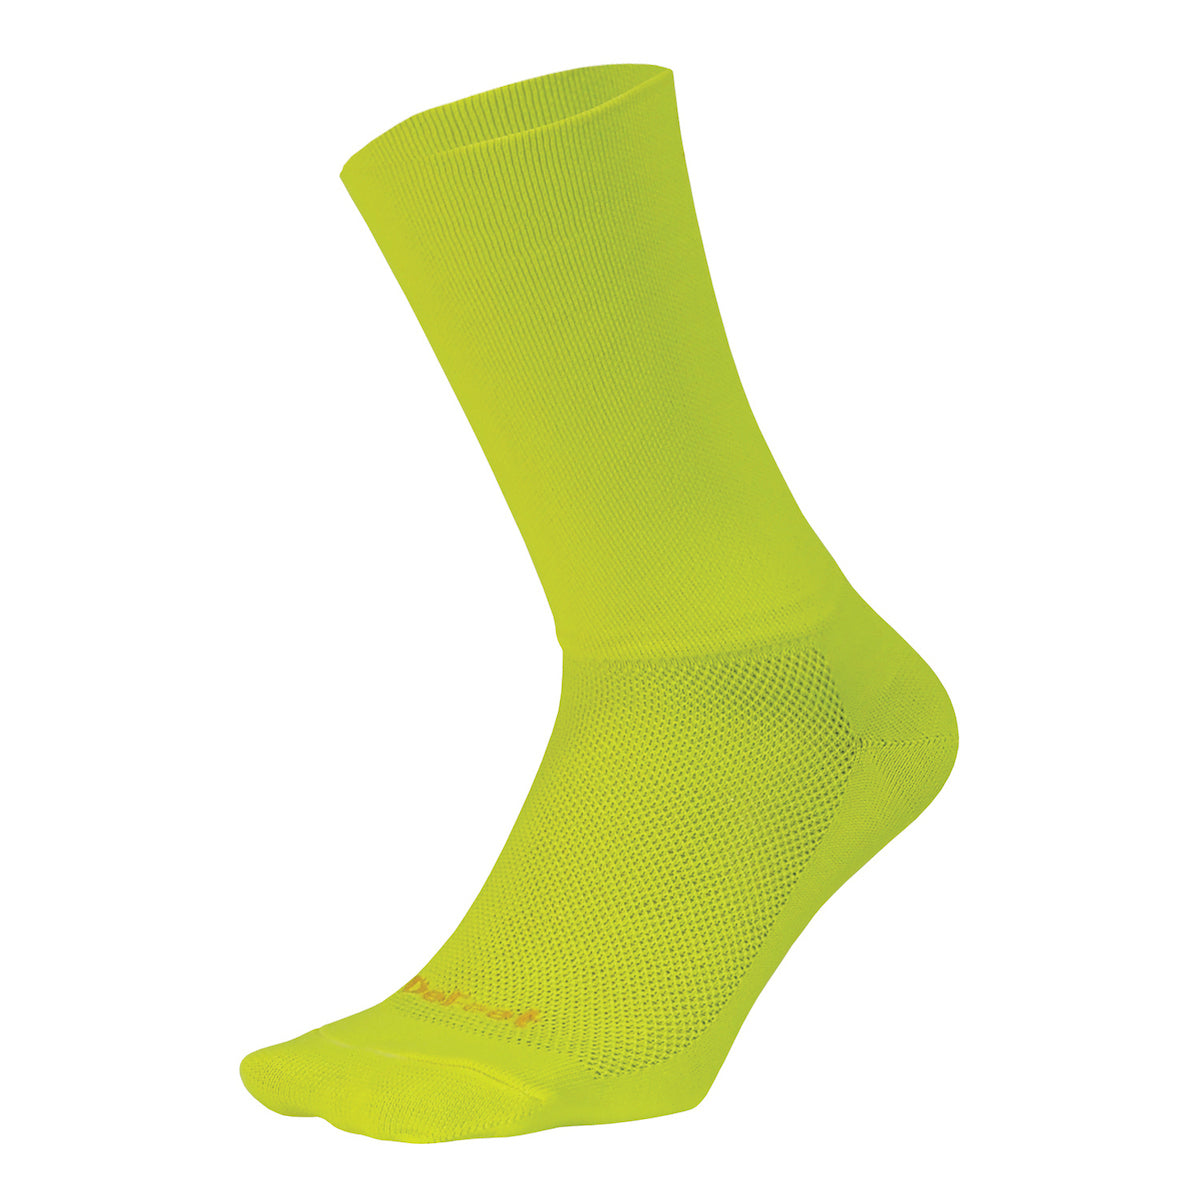 DeFeet Aireator 6" D-Logo cycling sock with 6" double cuff in neon yellow